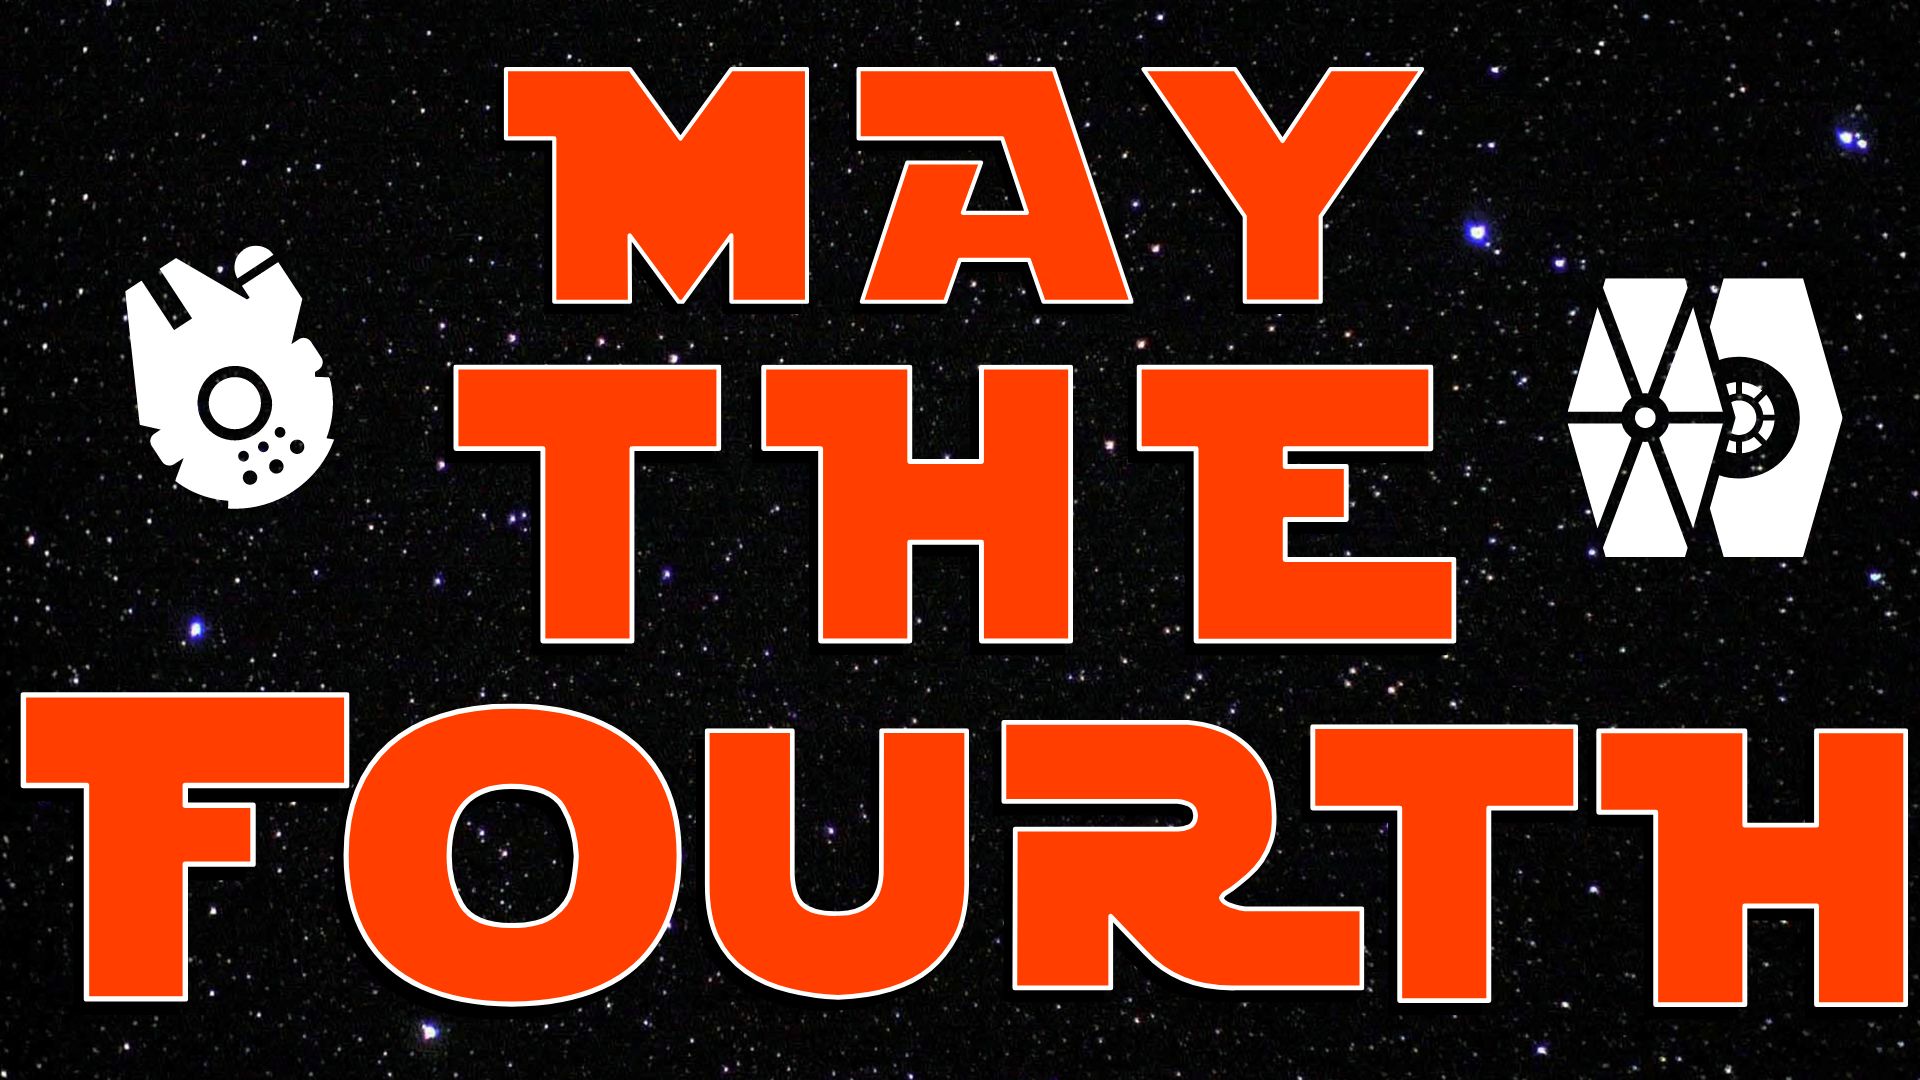 May the Fourth be With You